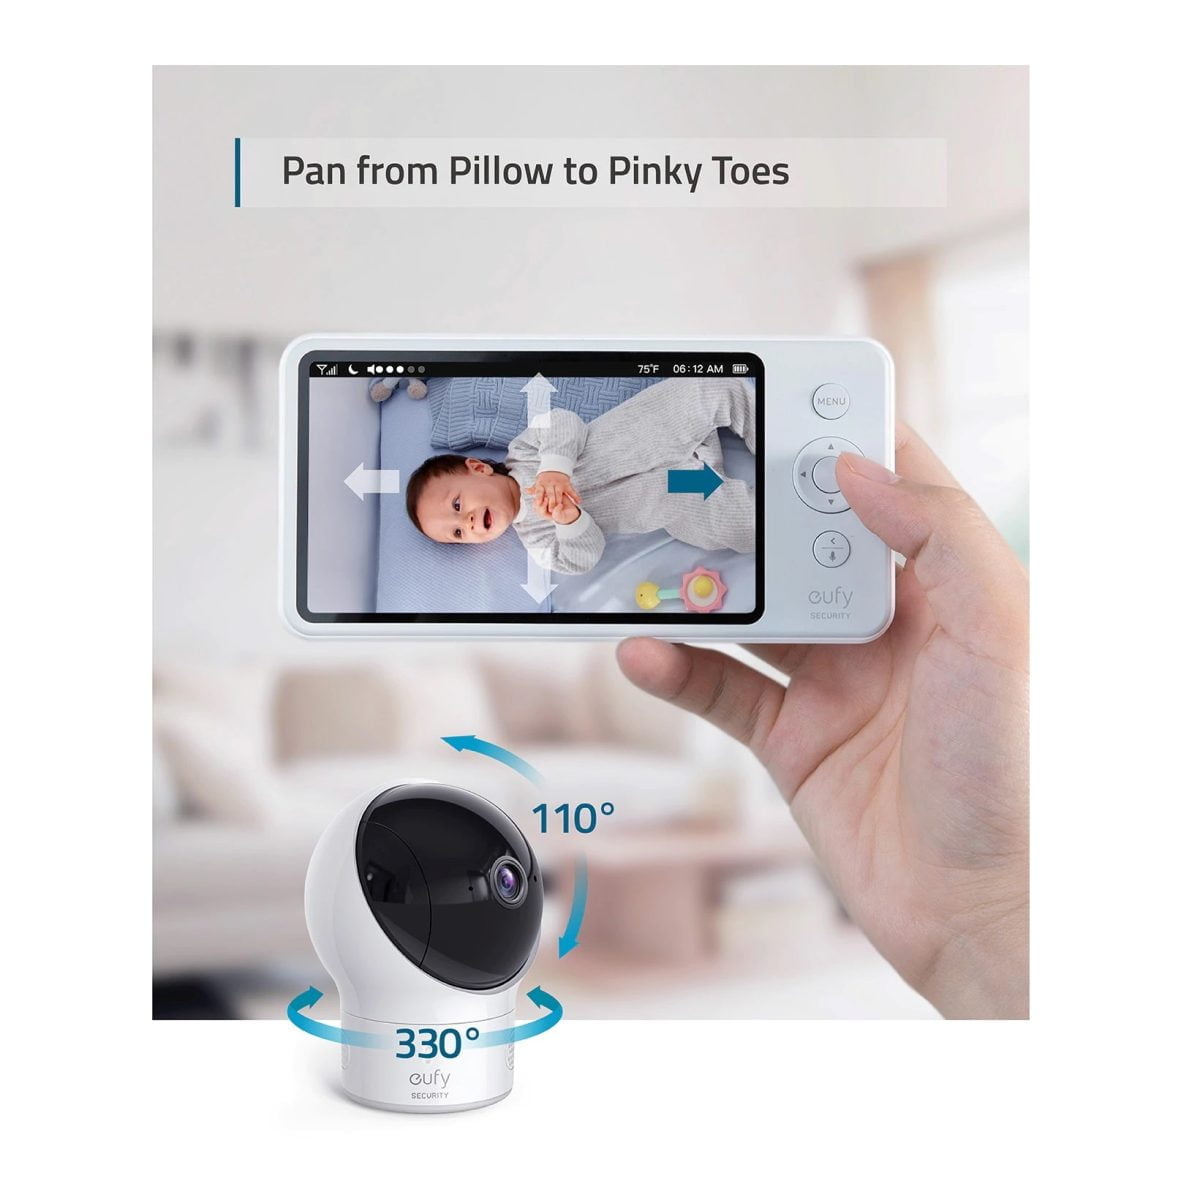 Eufy &Lt;H1&Gt;Eufy Spaceview Baby Monitor&Lt;/H1&Gt; Https://Www.youtube.com/Watch?V=2Exedt1-Rsc &Lt;Ul Class=&Quot;A-Unordered-List A-Vertical A-Spacing-Mini&Quot;&Gt; &Lt;Li&Gt;&Lt;Span Class=&Quot;A-List-Item&Quot;&Gt;&Lt;Strong&Gt;Sweet Dreams On The Big Screen&Lt;/Strong&Gt;: The Large 5&Quot; 720P Video Baby Monitor Display Shows A Sharp Picture With 10 Times More Detail Than Ordinary 240P-Display Baby Monitors.&Lt;/Span&Gt;&Lt;/Li&Gt; &Lt;Li&Gt;&Lt;Span Class=&Quot;A-List-Item&Quot;&Gt;&Lt;Strong&Gt;Ready For Their First Steps&Lt;/Strong&Gt;: When Your Baby Starts To Walk And Run Around, Just Attach The Included Lens To Expand The View To 110 Degrees. No Need To Purchase Another Lens.&Lt;/Span&Gt;&Lt;/Li&Gt; &Lt;Li&Gt;&Lt;Span Class=&Quot;A-List-Item&Quot;&Gt;&Lt;Strong&Gt;Pan From Pillow To Pinky Toes&Lt;/Strong&Gt;: Pan The Lens 330° To See Corner-To-Corner And Tilt 110° To See Floor To Ceiling.&Lt;/Span&Gt;&Lt;/Li&Gt; &Lt;Li&Gt;&Lt;Span Class=&Quot;A-List-Item&Quot;&Gt;&Lt;Strong&Gt;Instant Alerts&Lt;/Strong&Gt;: Get Alerted Immediately From The Video Baby Monitor When Your Baby Is Crying, Even When You'Re Sleeping.&Lt;/Span&Gt;&Lt;/Li&Gt; &Lt;Li&Gt;&Lt;Span Class=&Quot;A-List-Item&Quot;&Gt;&Lt;Strong&Gt;Mobile&Lt;/Strong&Gt;: The 460Ft - 1000Ft Range-Coverage Area Allows You To Watch Your Little One Rest Peacefully In Real-Time Wherever You Are In Your Home. Note: Supports 1000Ft Max. In An Open Area. Notice：micro Sd Card Is Not Supported.&Lt;/Span&Gt;&Lt;/Li&Gt; &Lt;/Ul&Gt; Baby Monitor Eufy Spaceview Baby Monitor T83002D3